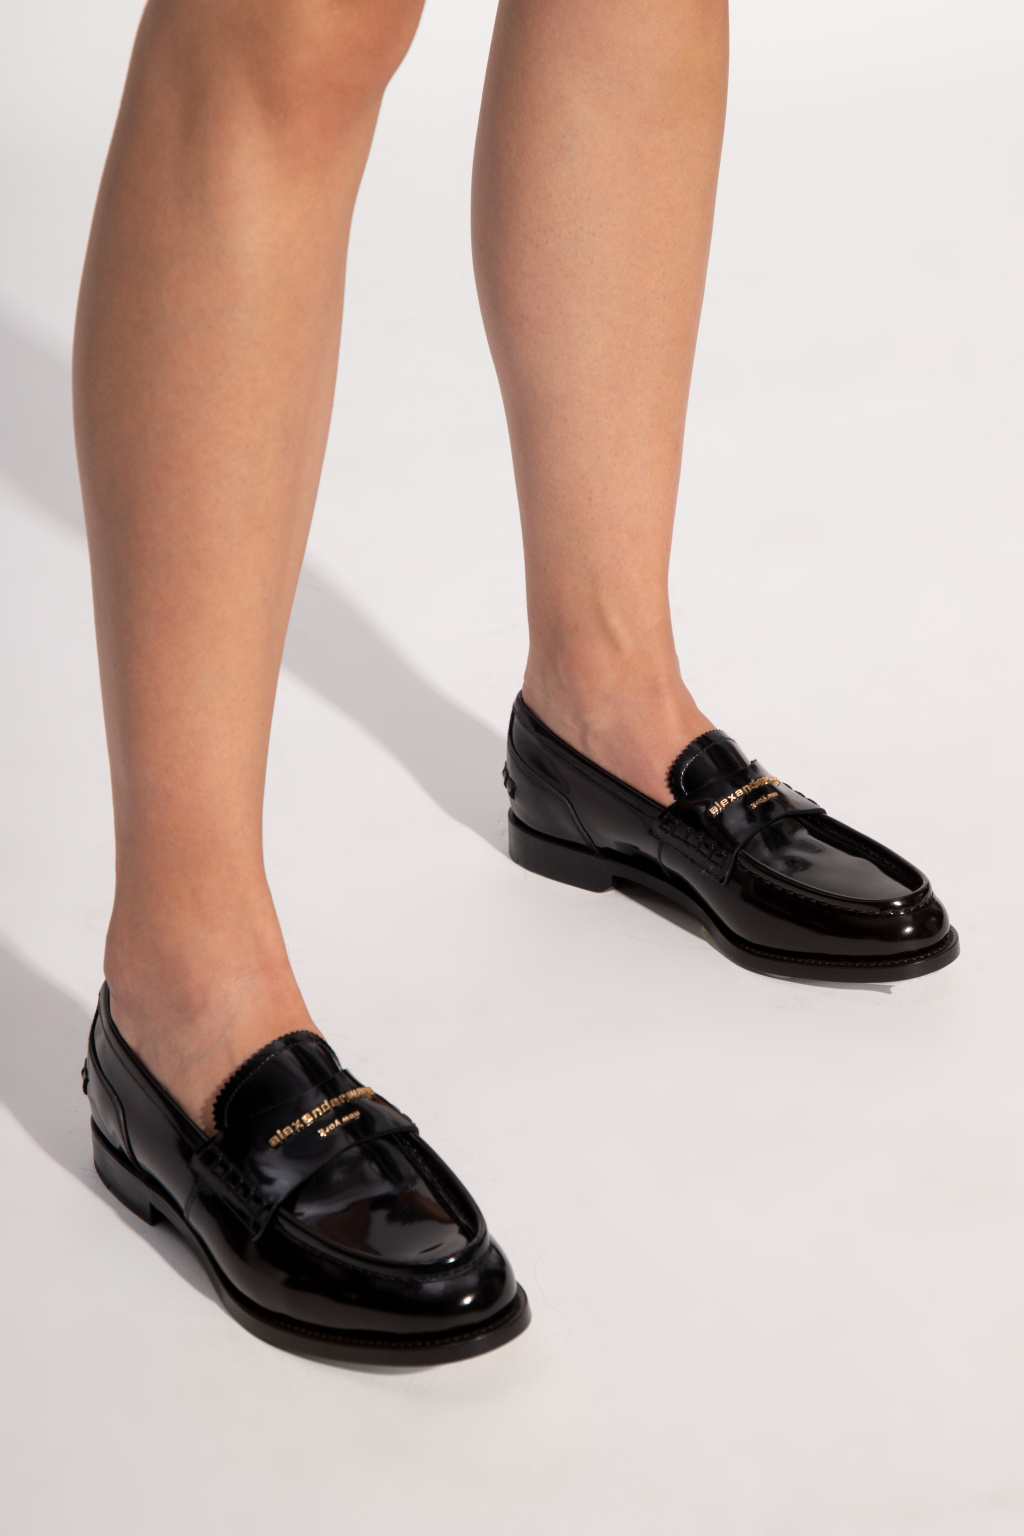 IetpShops | Alexander Wang 'Carter' loafers | Follow lead and pop on a pair glittery sandals to add a fun | Shoes